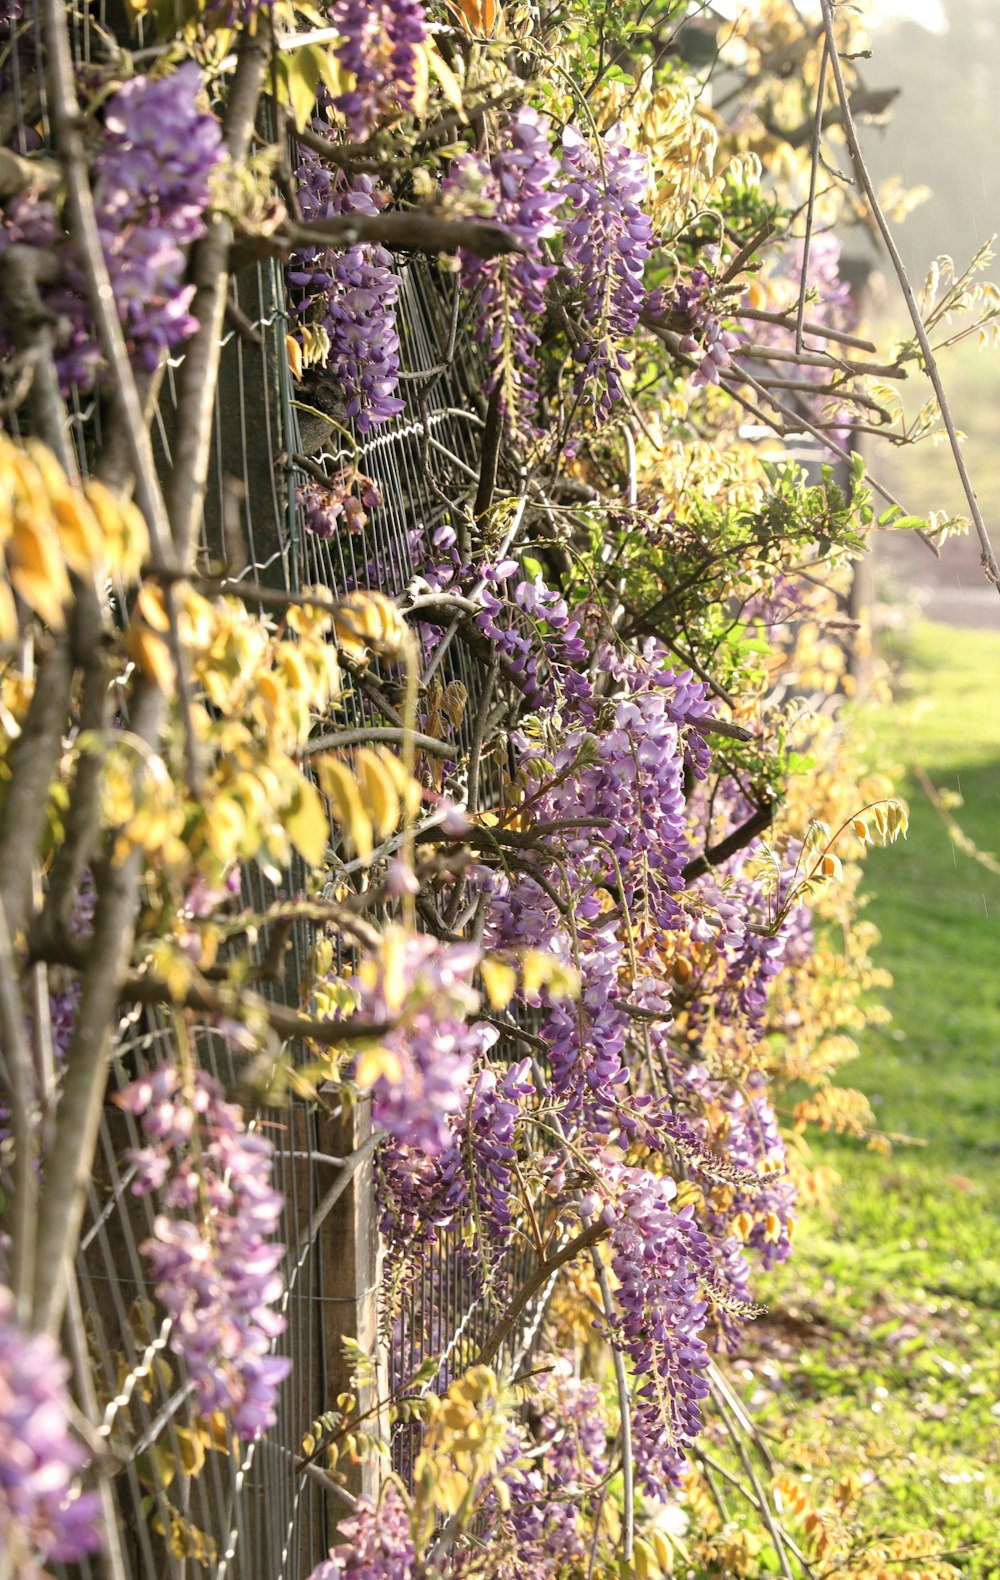 a fence with purple flowers growing on it